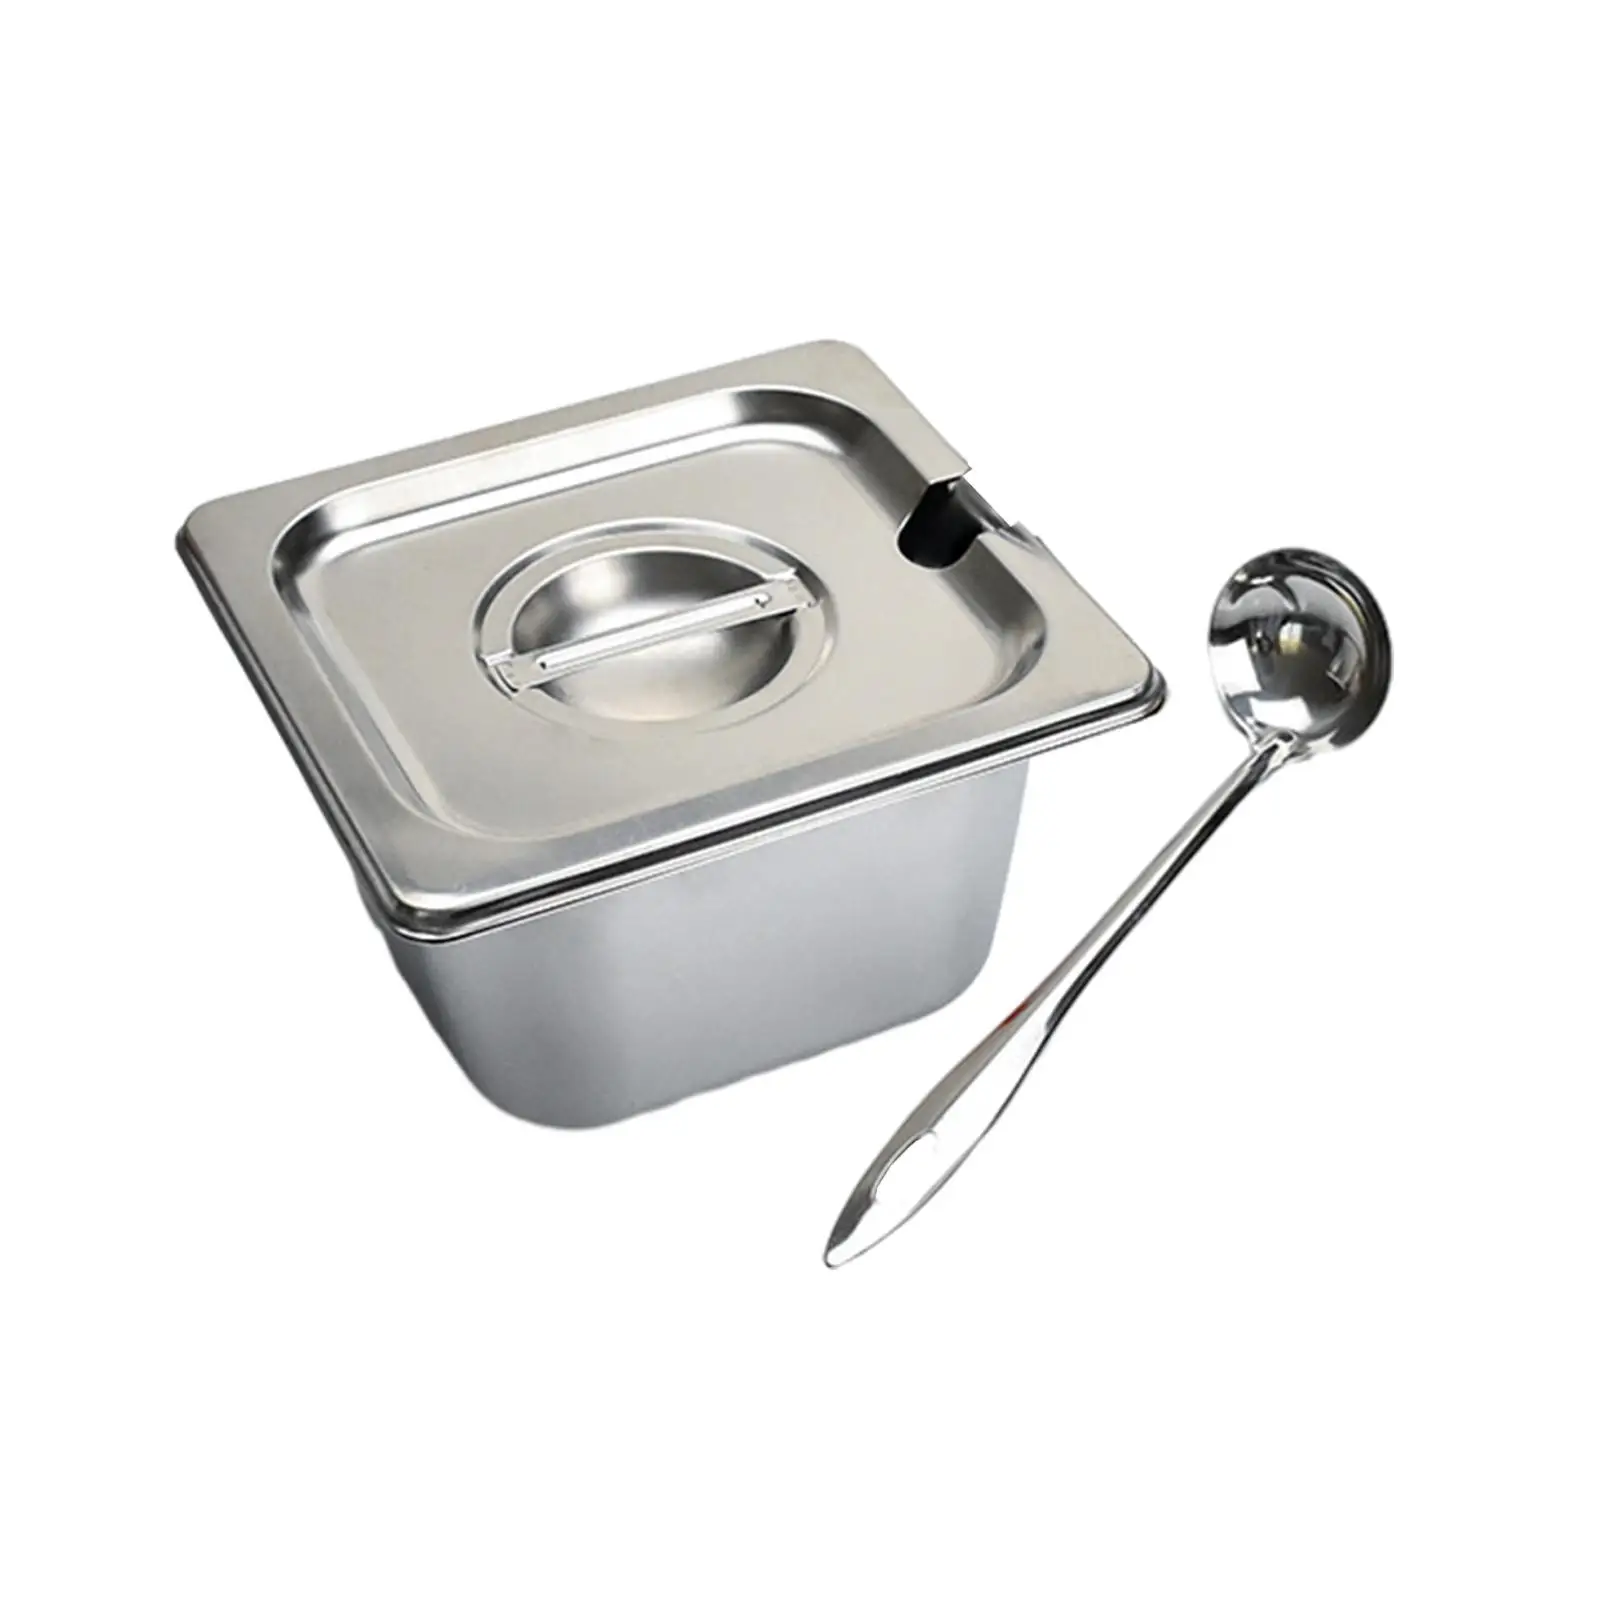 Stainless Steel Hotel Pans Multifunctional with Lids and Spoon Steam Table Pan for Buffet Chafing Dish Restaurant Food